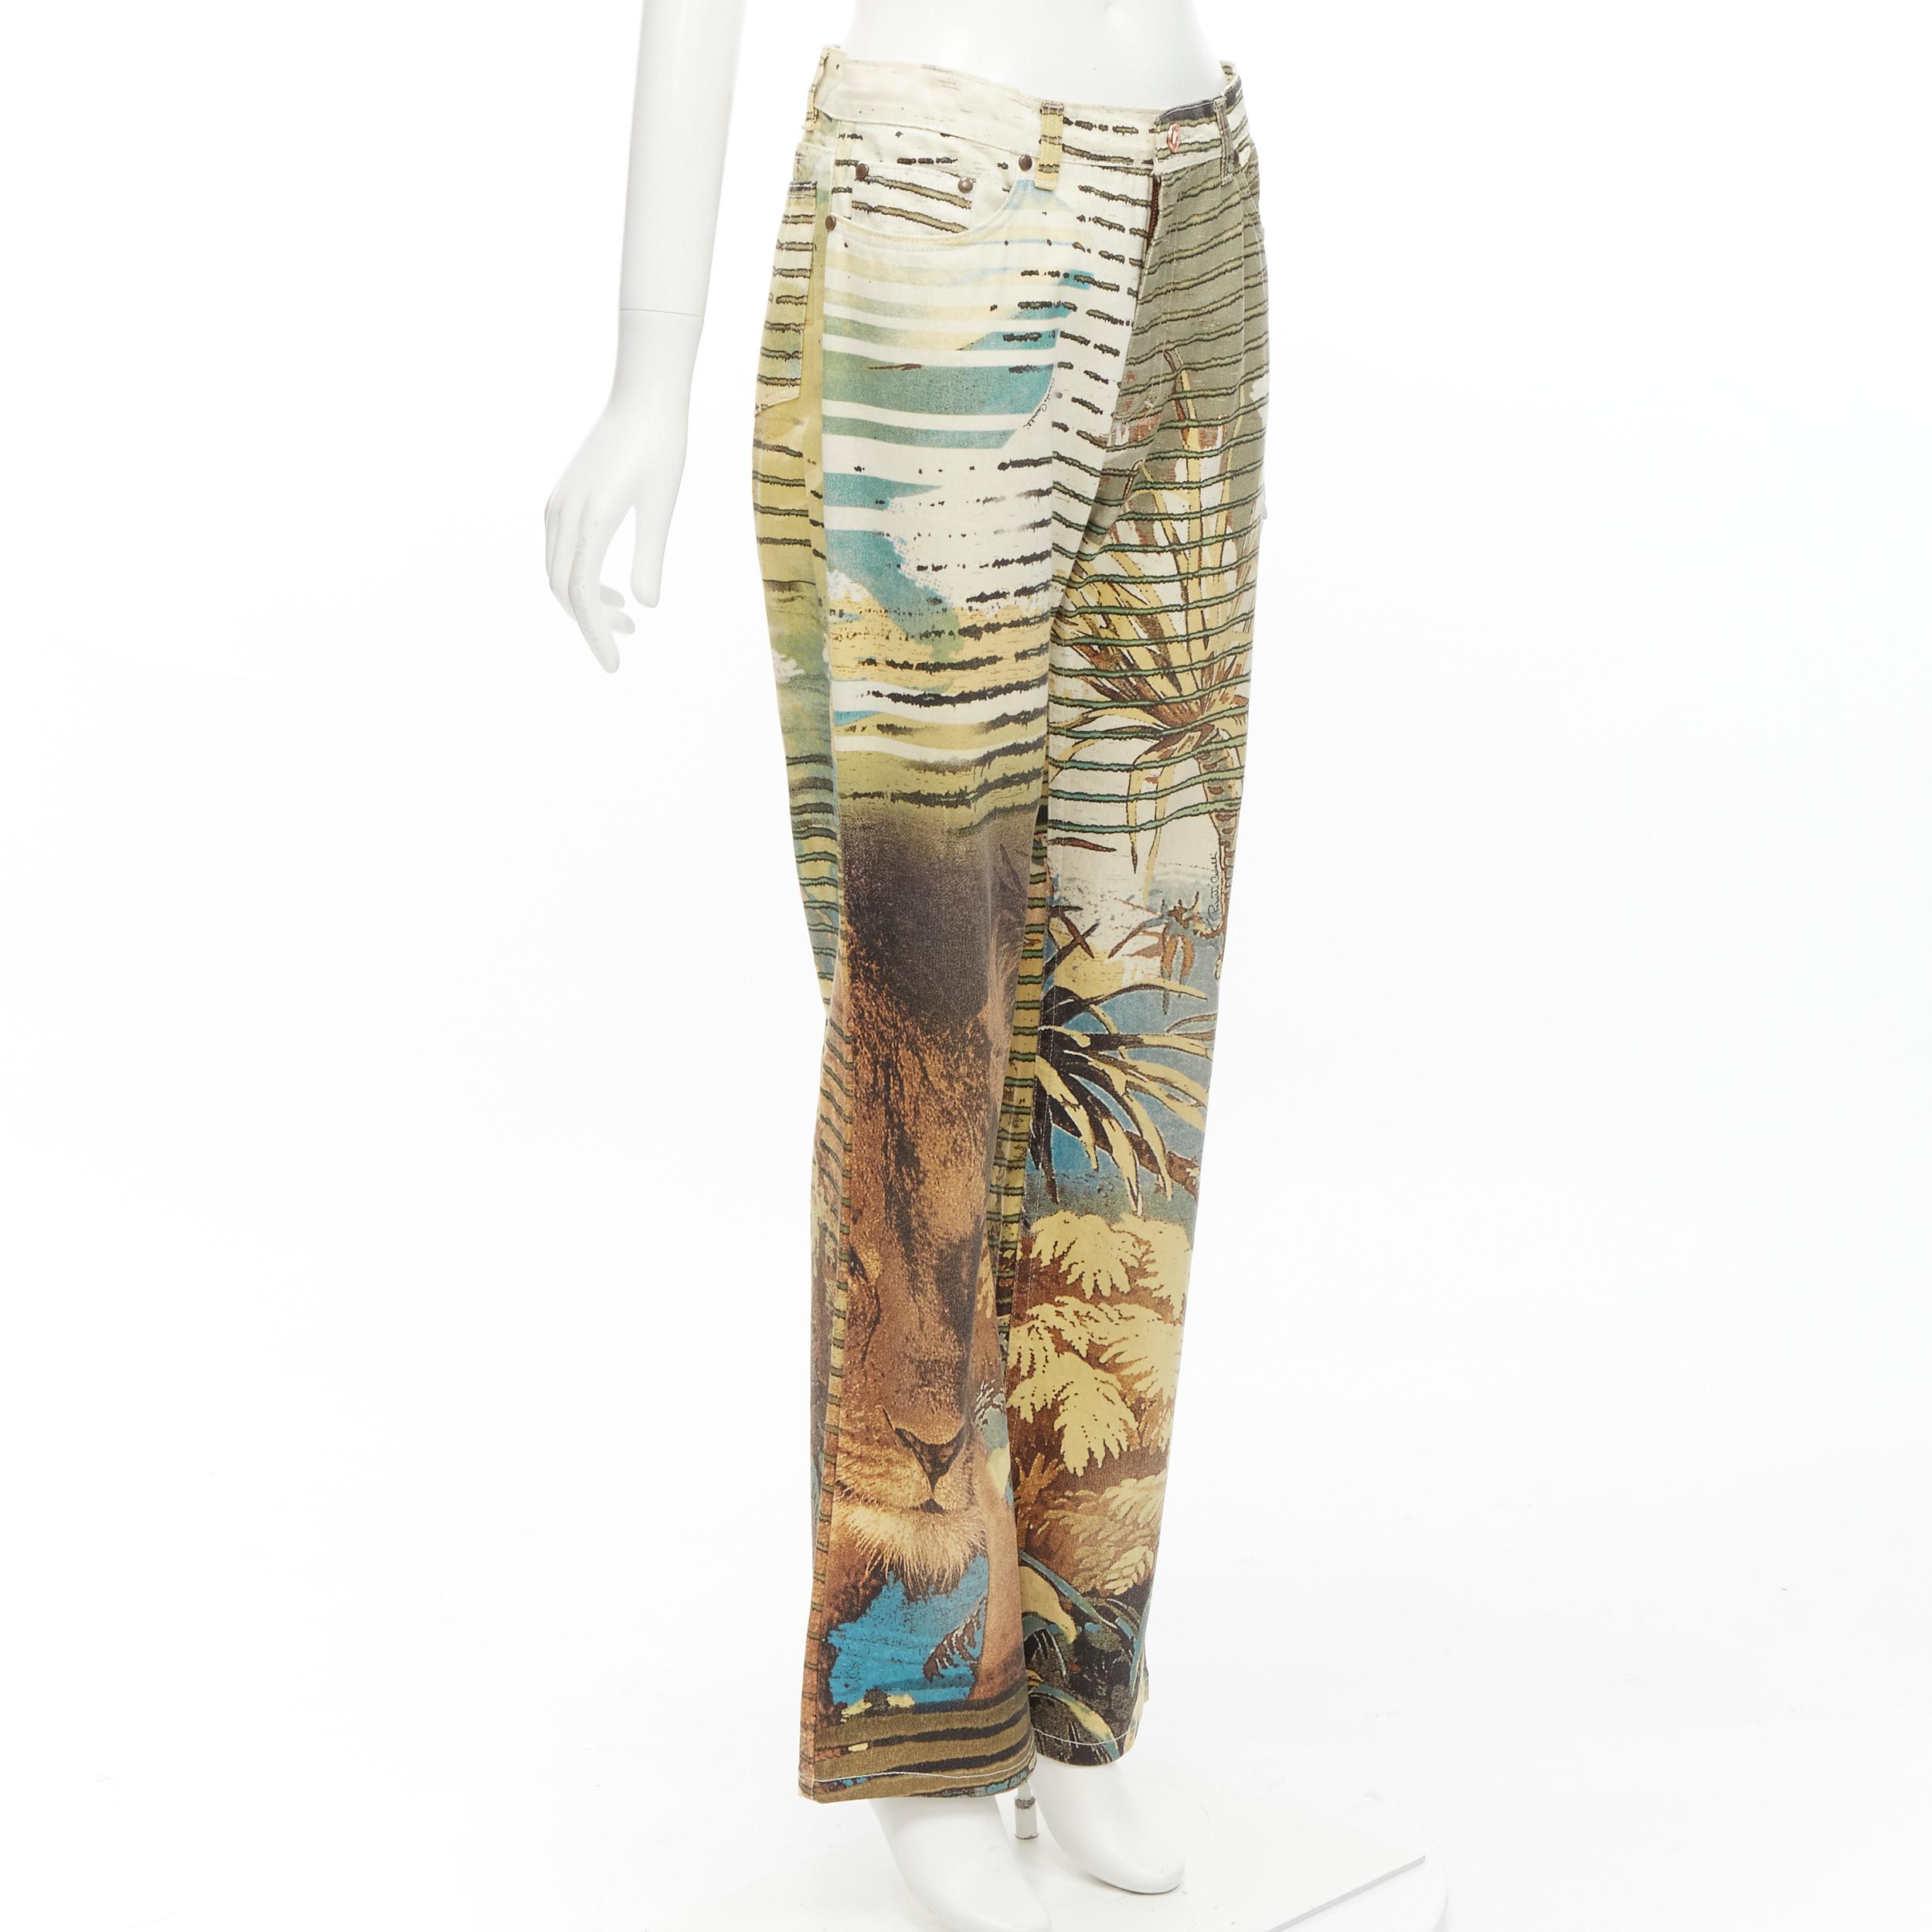 ROBERTO CAVALLI Vintage lion jungle stripes print cotton flared pants S
Reference: CNLE/A00192
Brand: Roberto Cavalli
Designer: Roberto Cavalli
Material: Cotton, Elastane
Color: Beige, Blue
Pattern: Animal Print
Closure: Zip Fly
Made in: